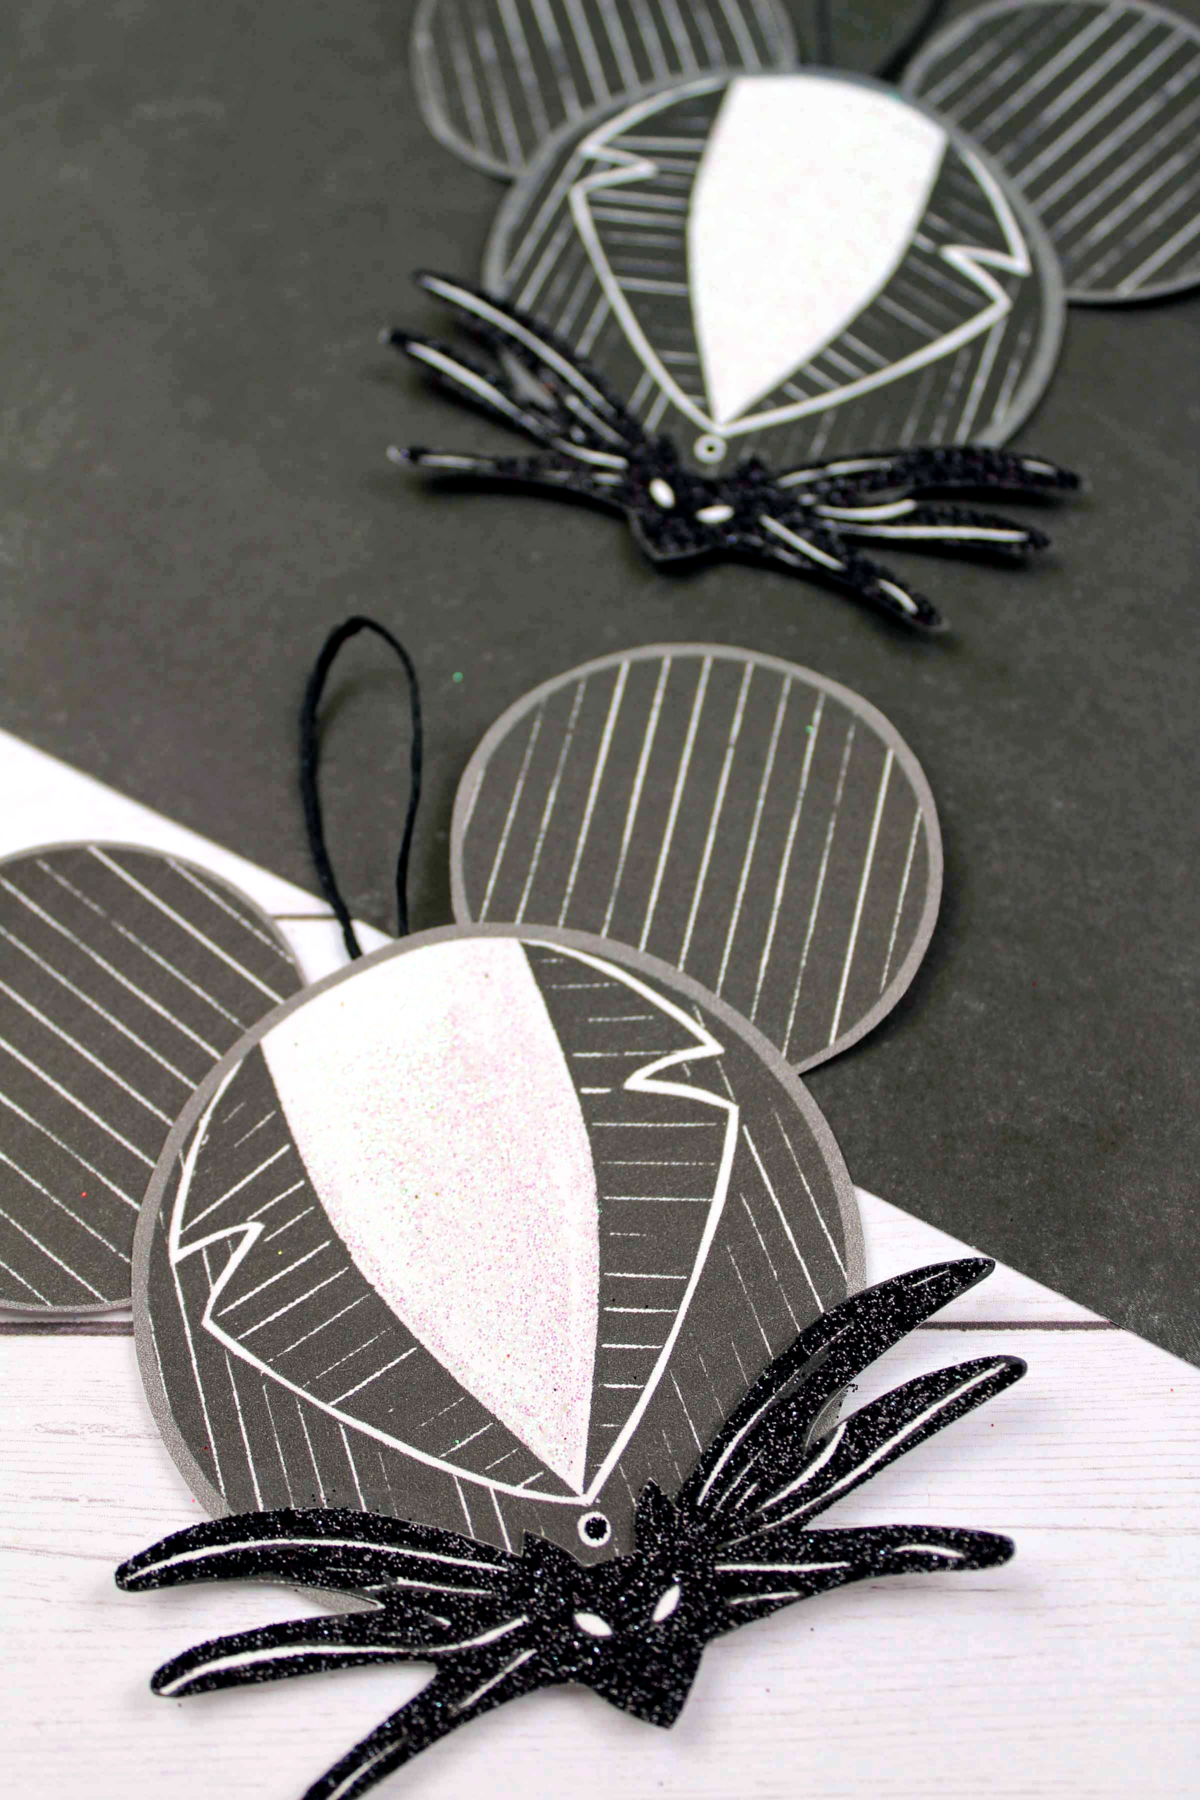 Make your own Jack Skellington Suit Mickey Ears Christmas ornament with this easy to follow tutorial. Free printable template included!